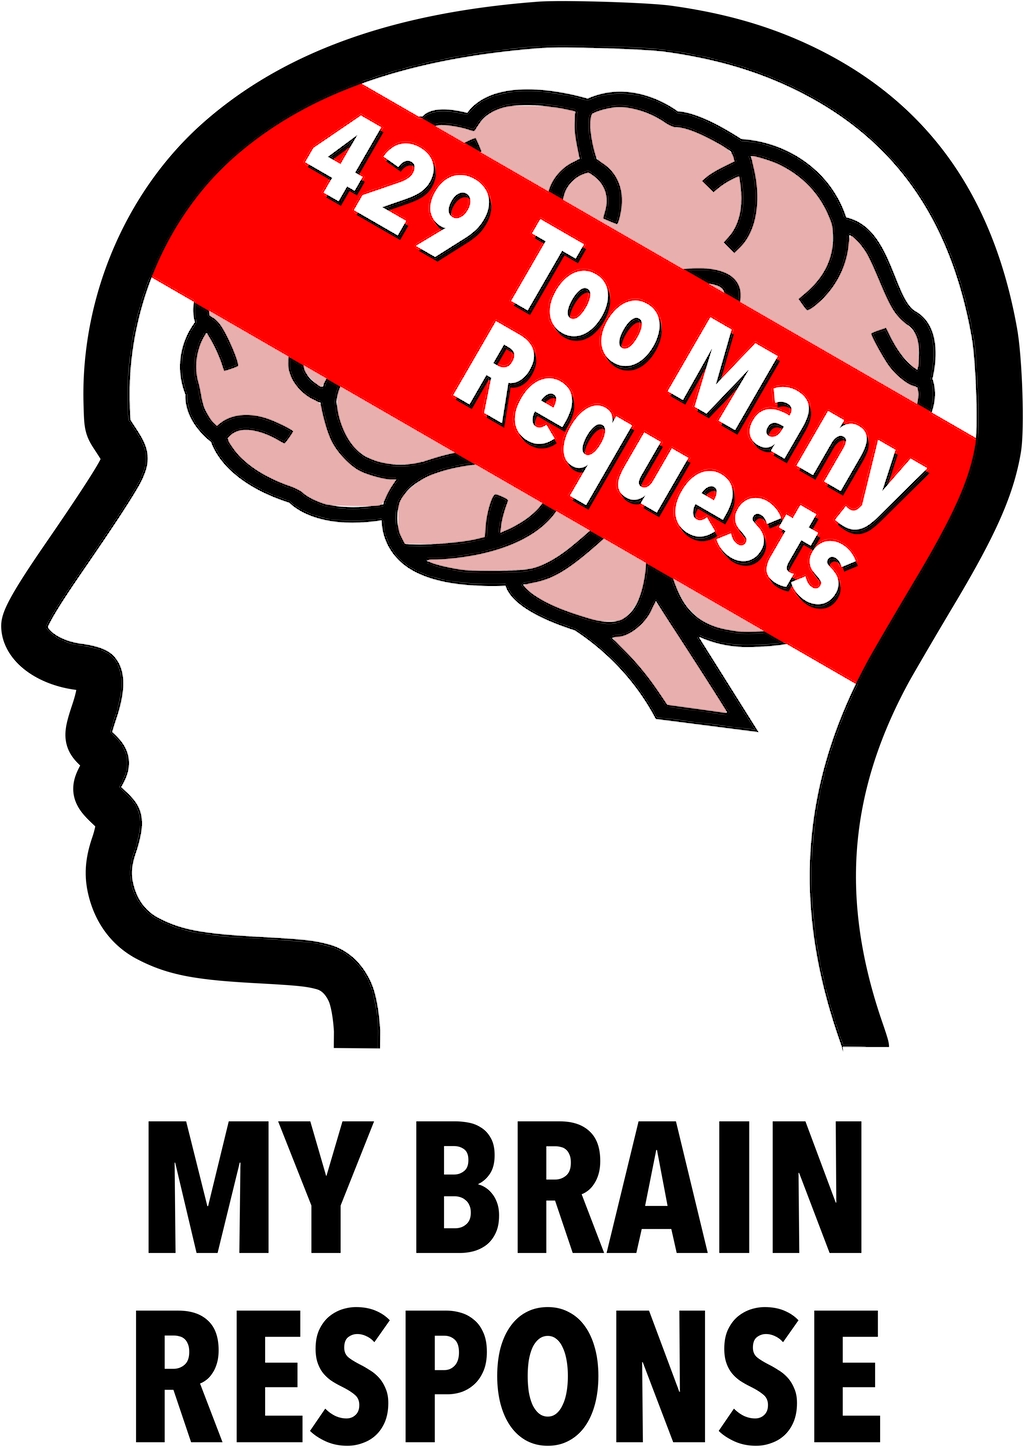 My Brain Response: 429 Too Many Requests